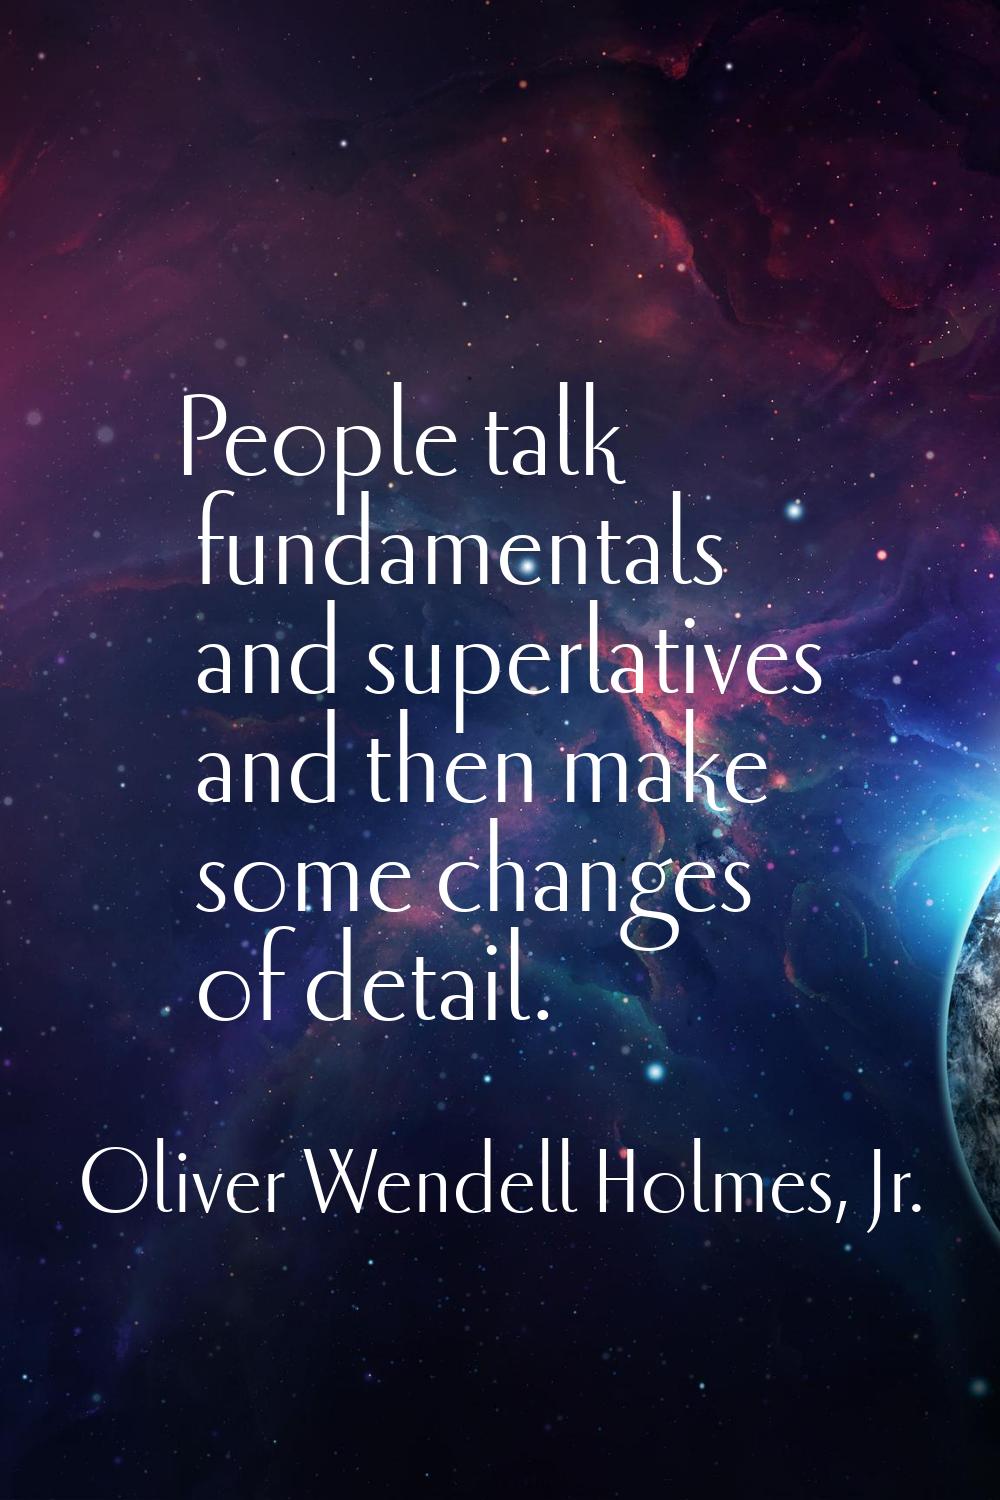 People talk fundamentals and superlatives and then make some changes of detail.